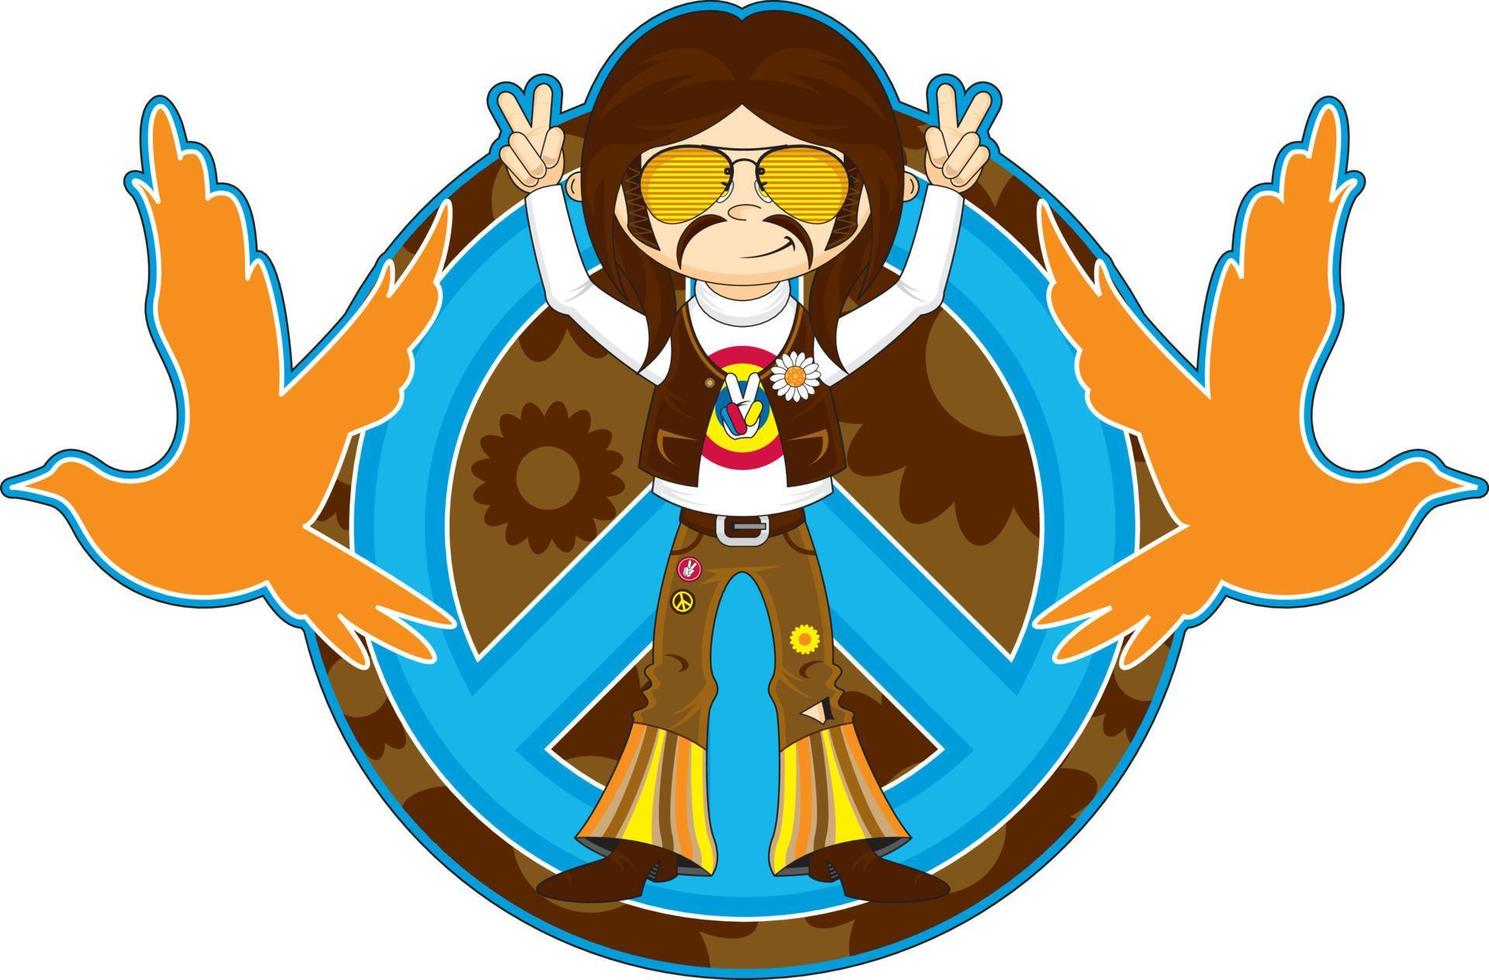 Cartoon Sixties Hippie Character with Peace Doves vector